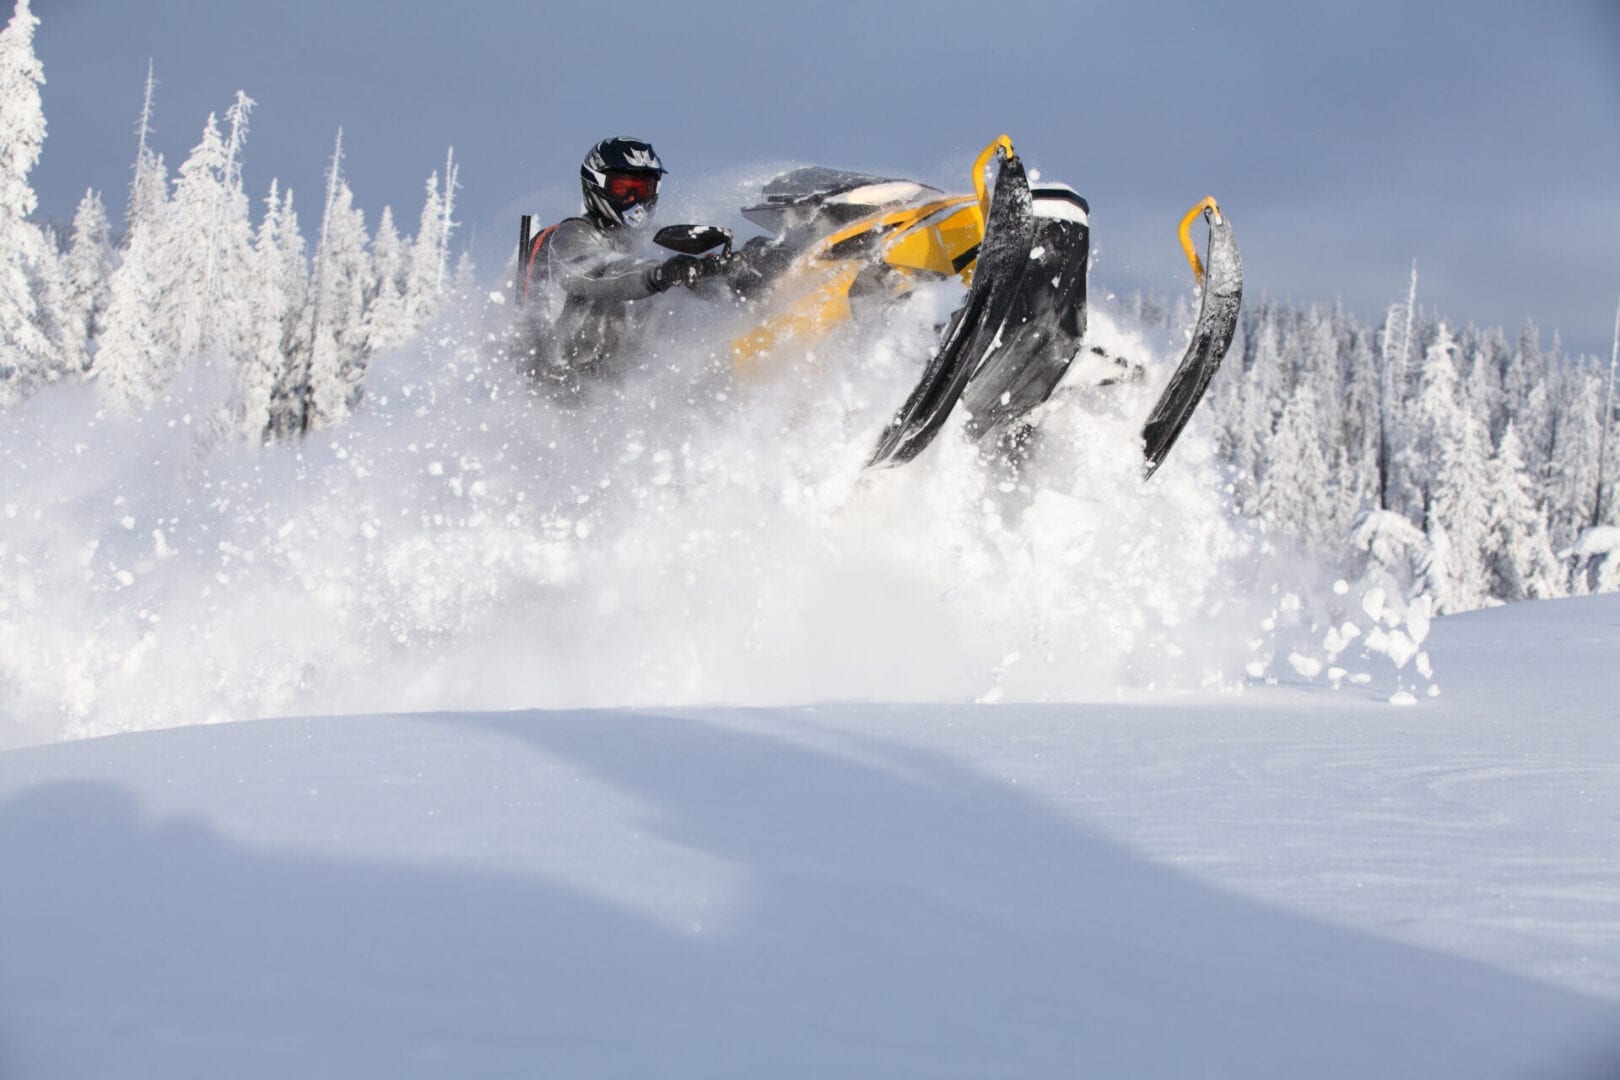 Yellow snowmobile driving in powder snow